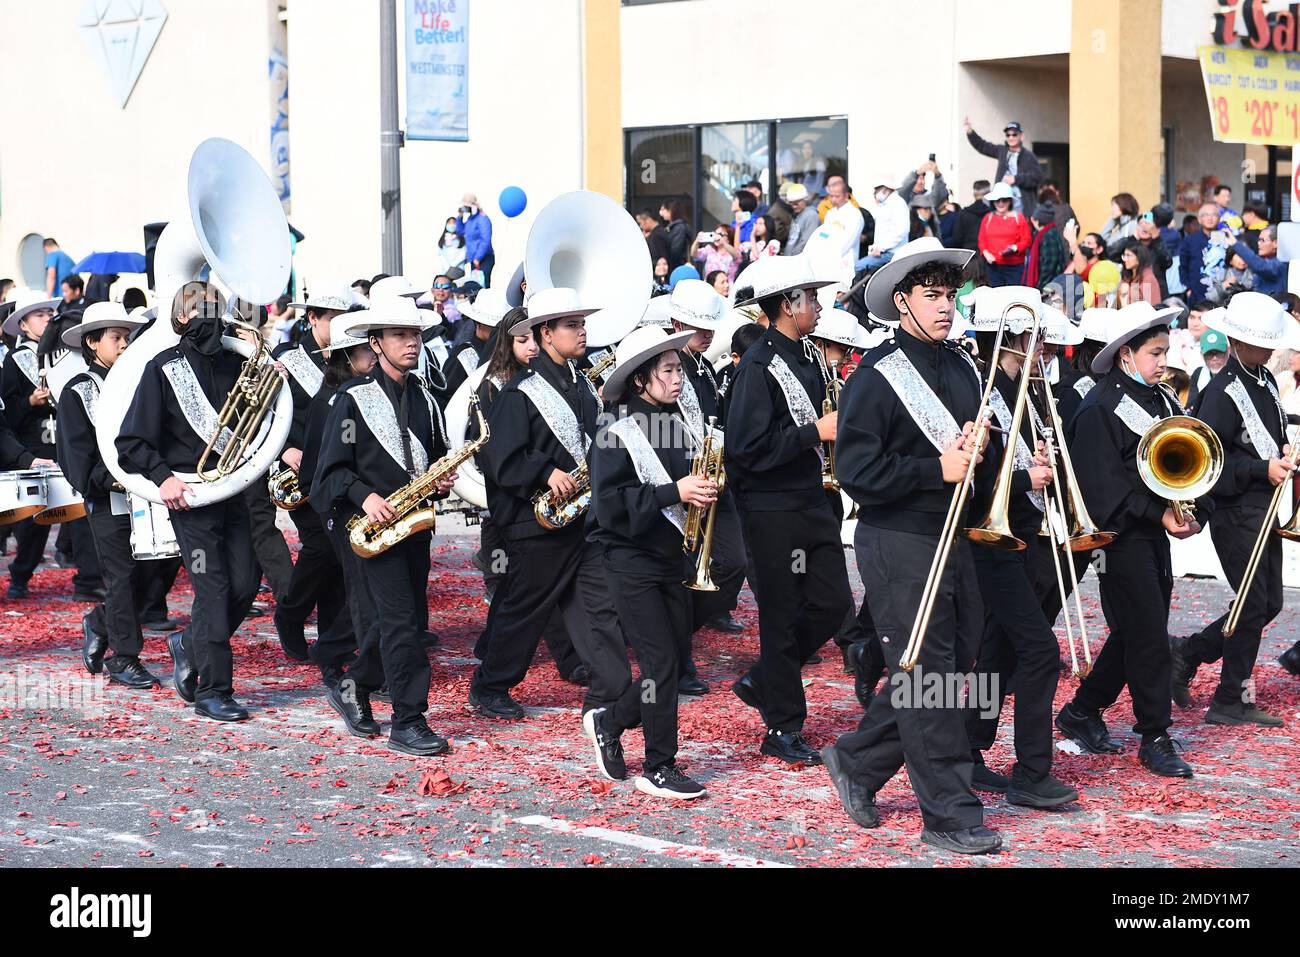 WESTMINSTER, CALIFORNIA - 22 JAN 2023: The McGarvin Intermediate School Marching Band at the Tet Parade Celebrating the Year of the Cat. Stock Photo